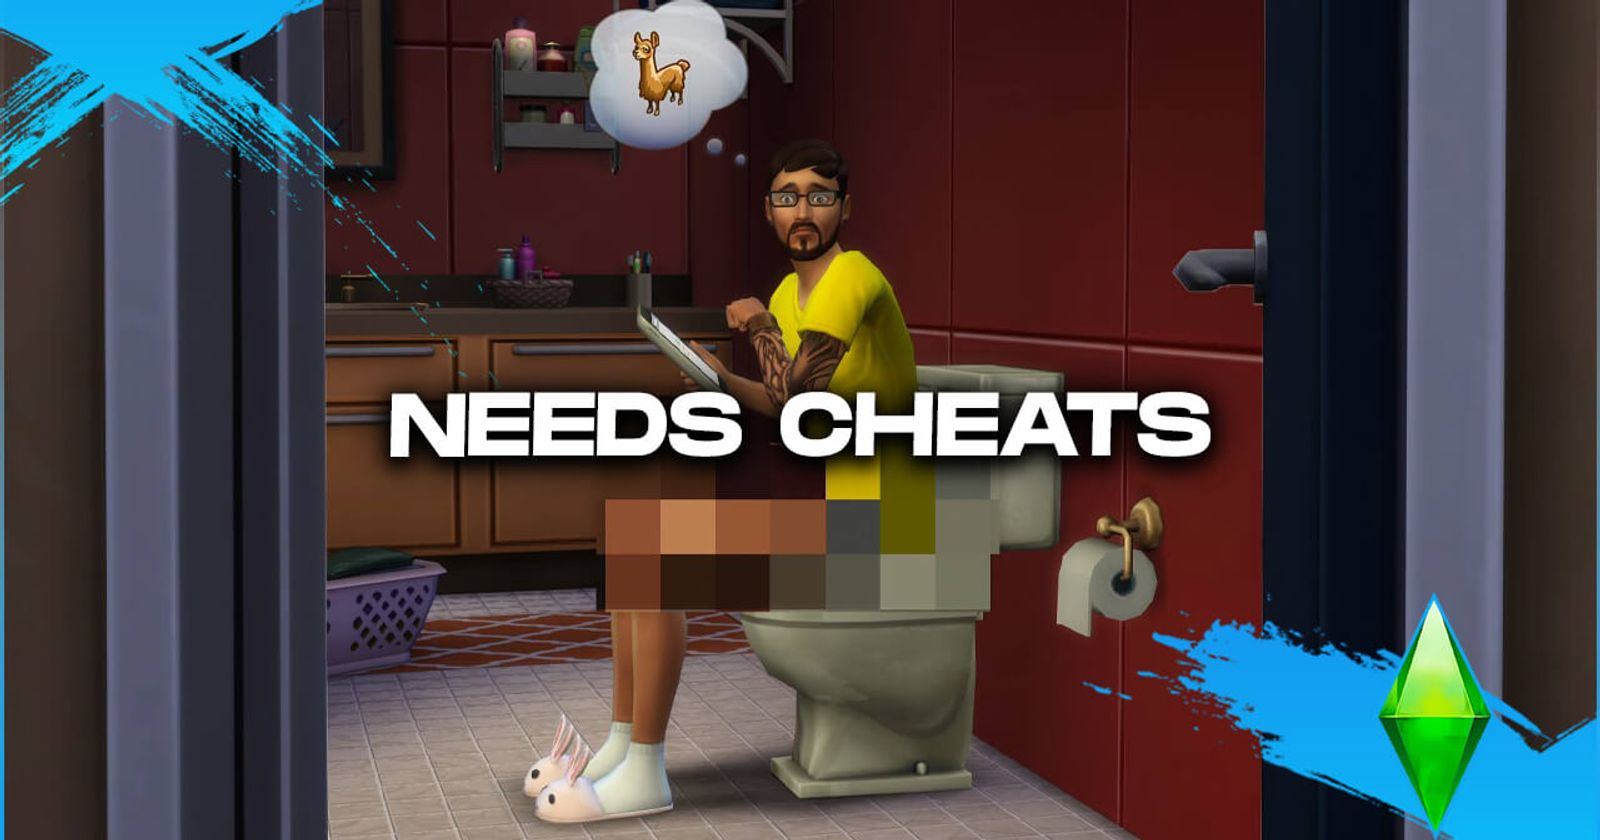 Sims 4 Console cheat code / money cheat on Xbox One/PS4 